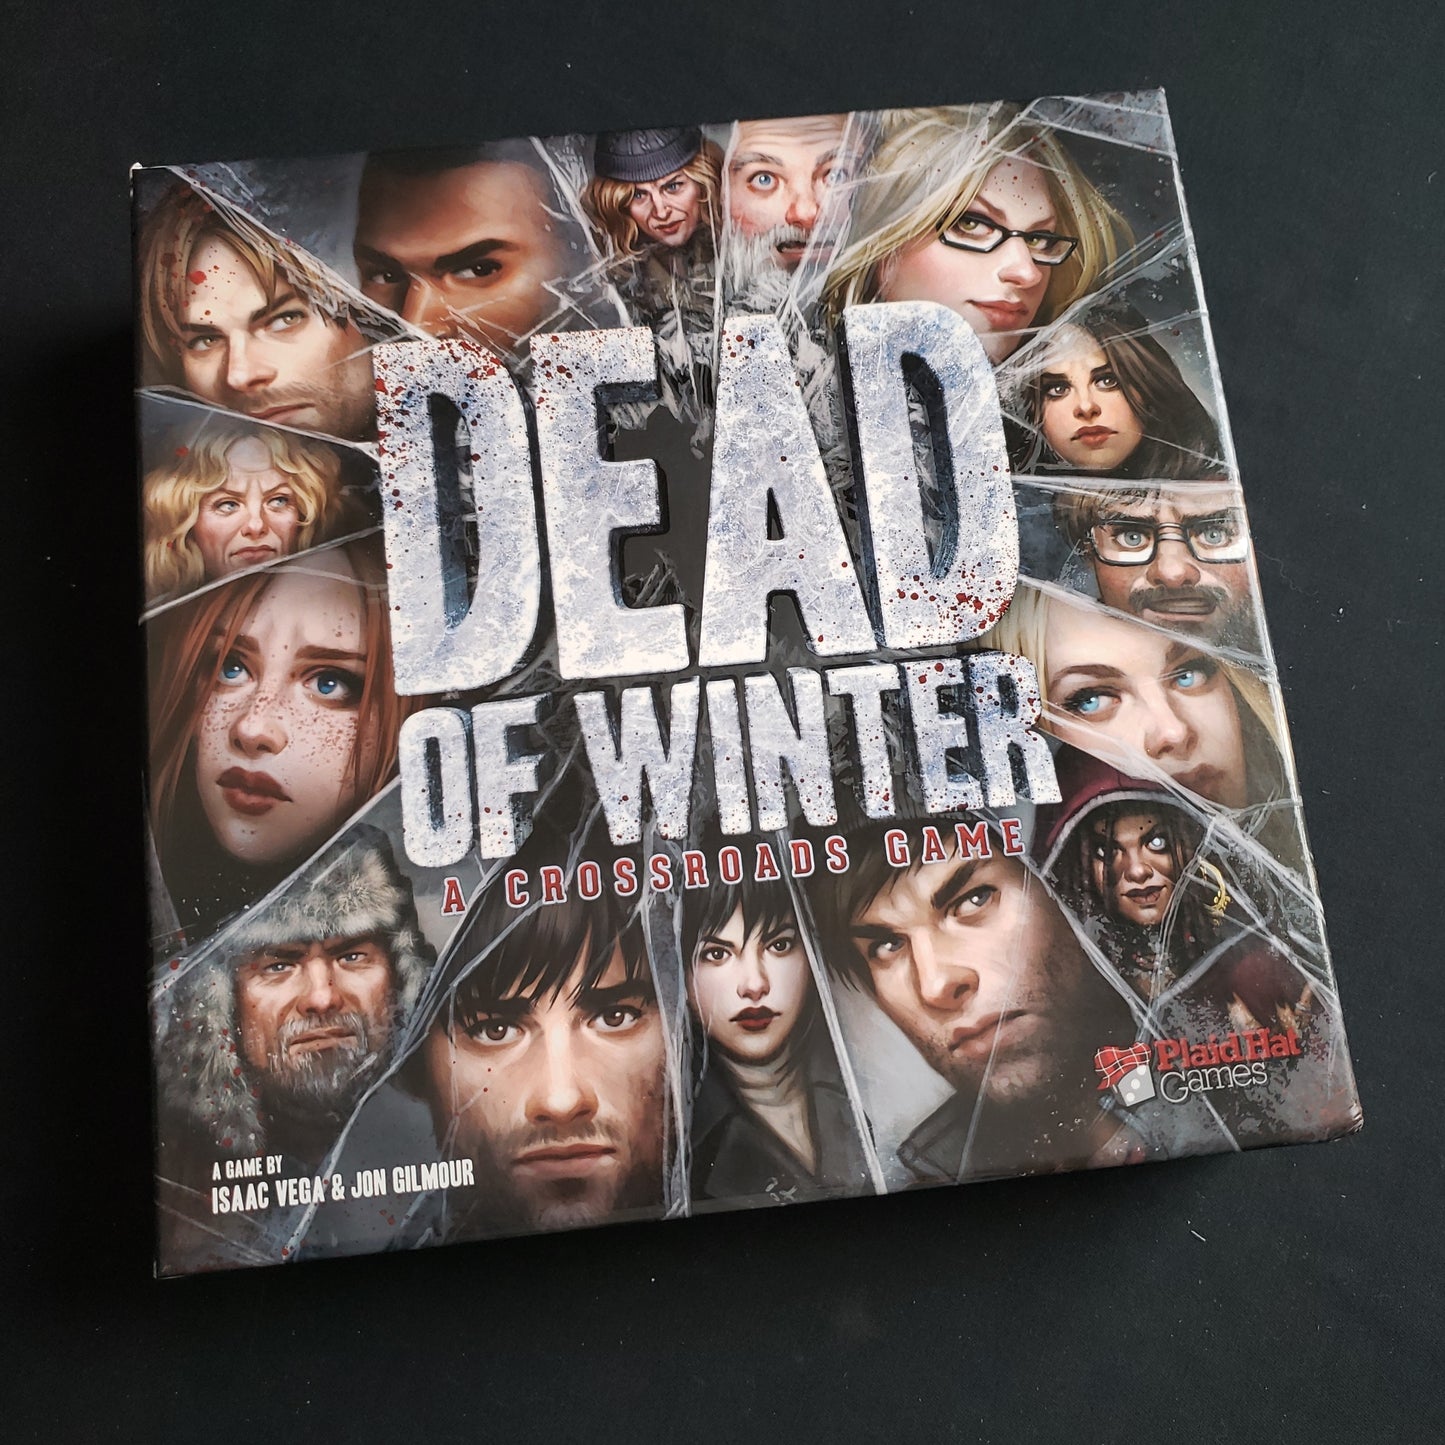 Image shows the front cover of the box of the Dead of Winter board game